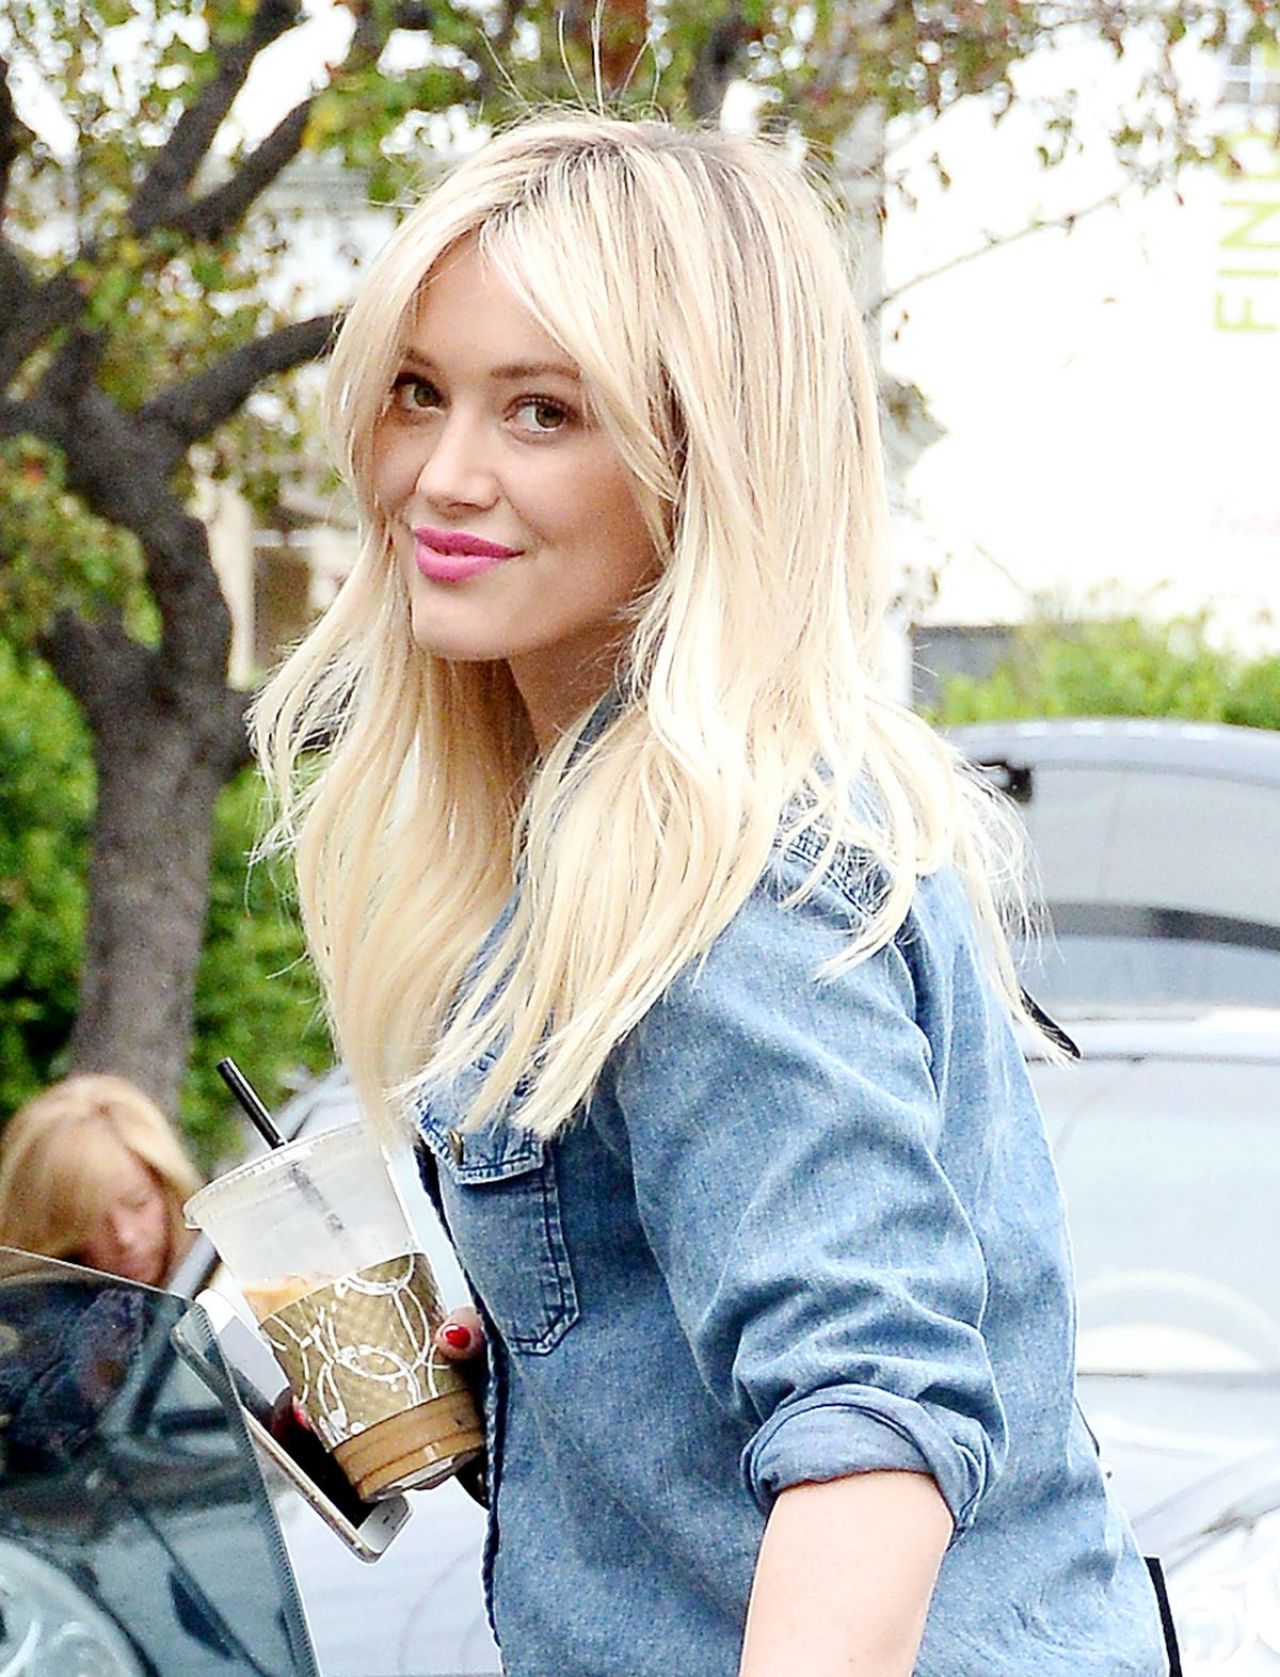 Hilary Duff West Hollywood March 21, 2017 – Star Style